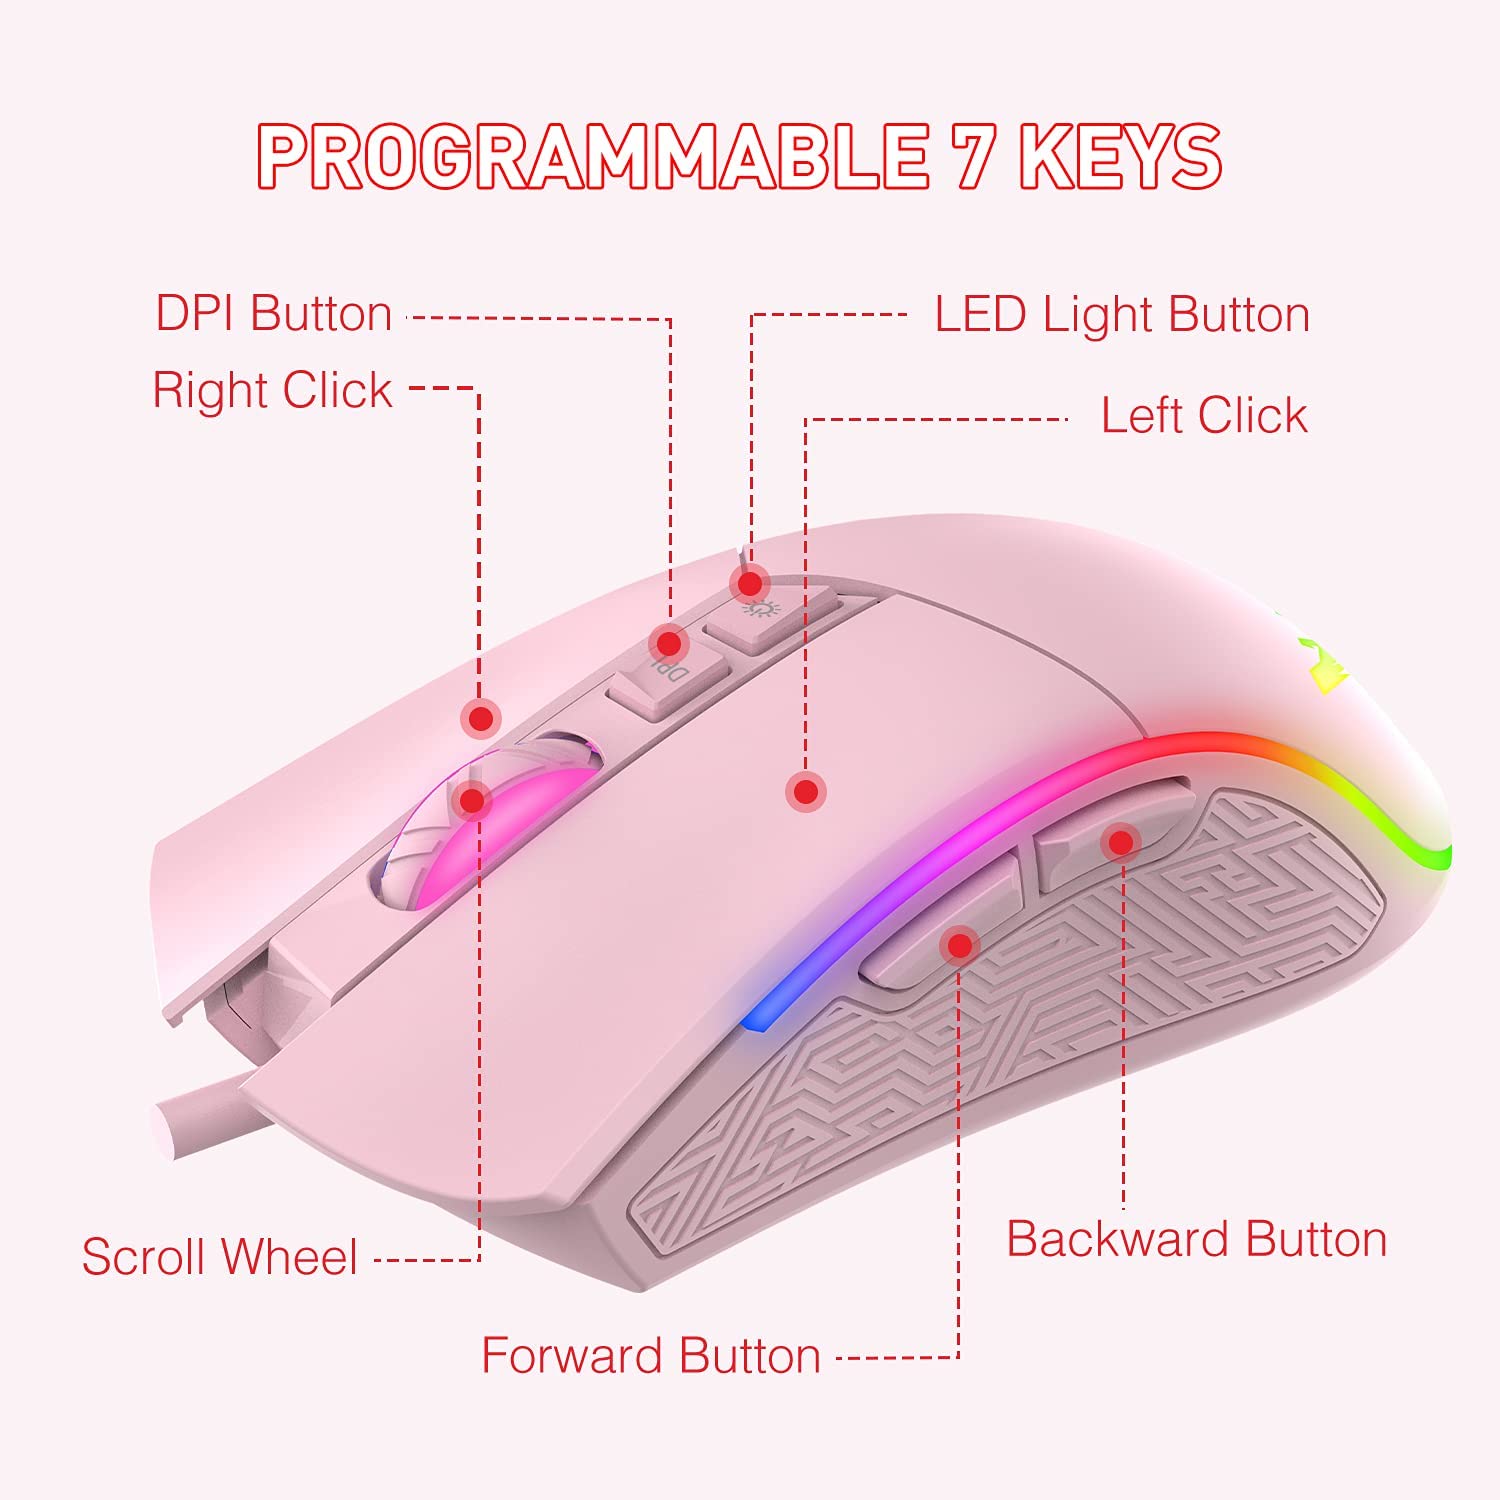 HAVIT MS733 RGB Programmable Gaming Mouse (2020 Version)